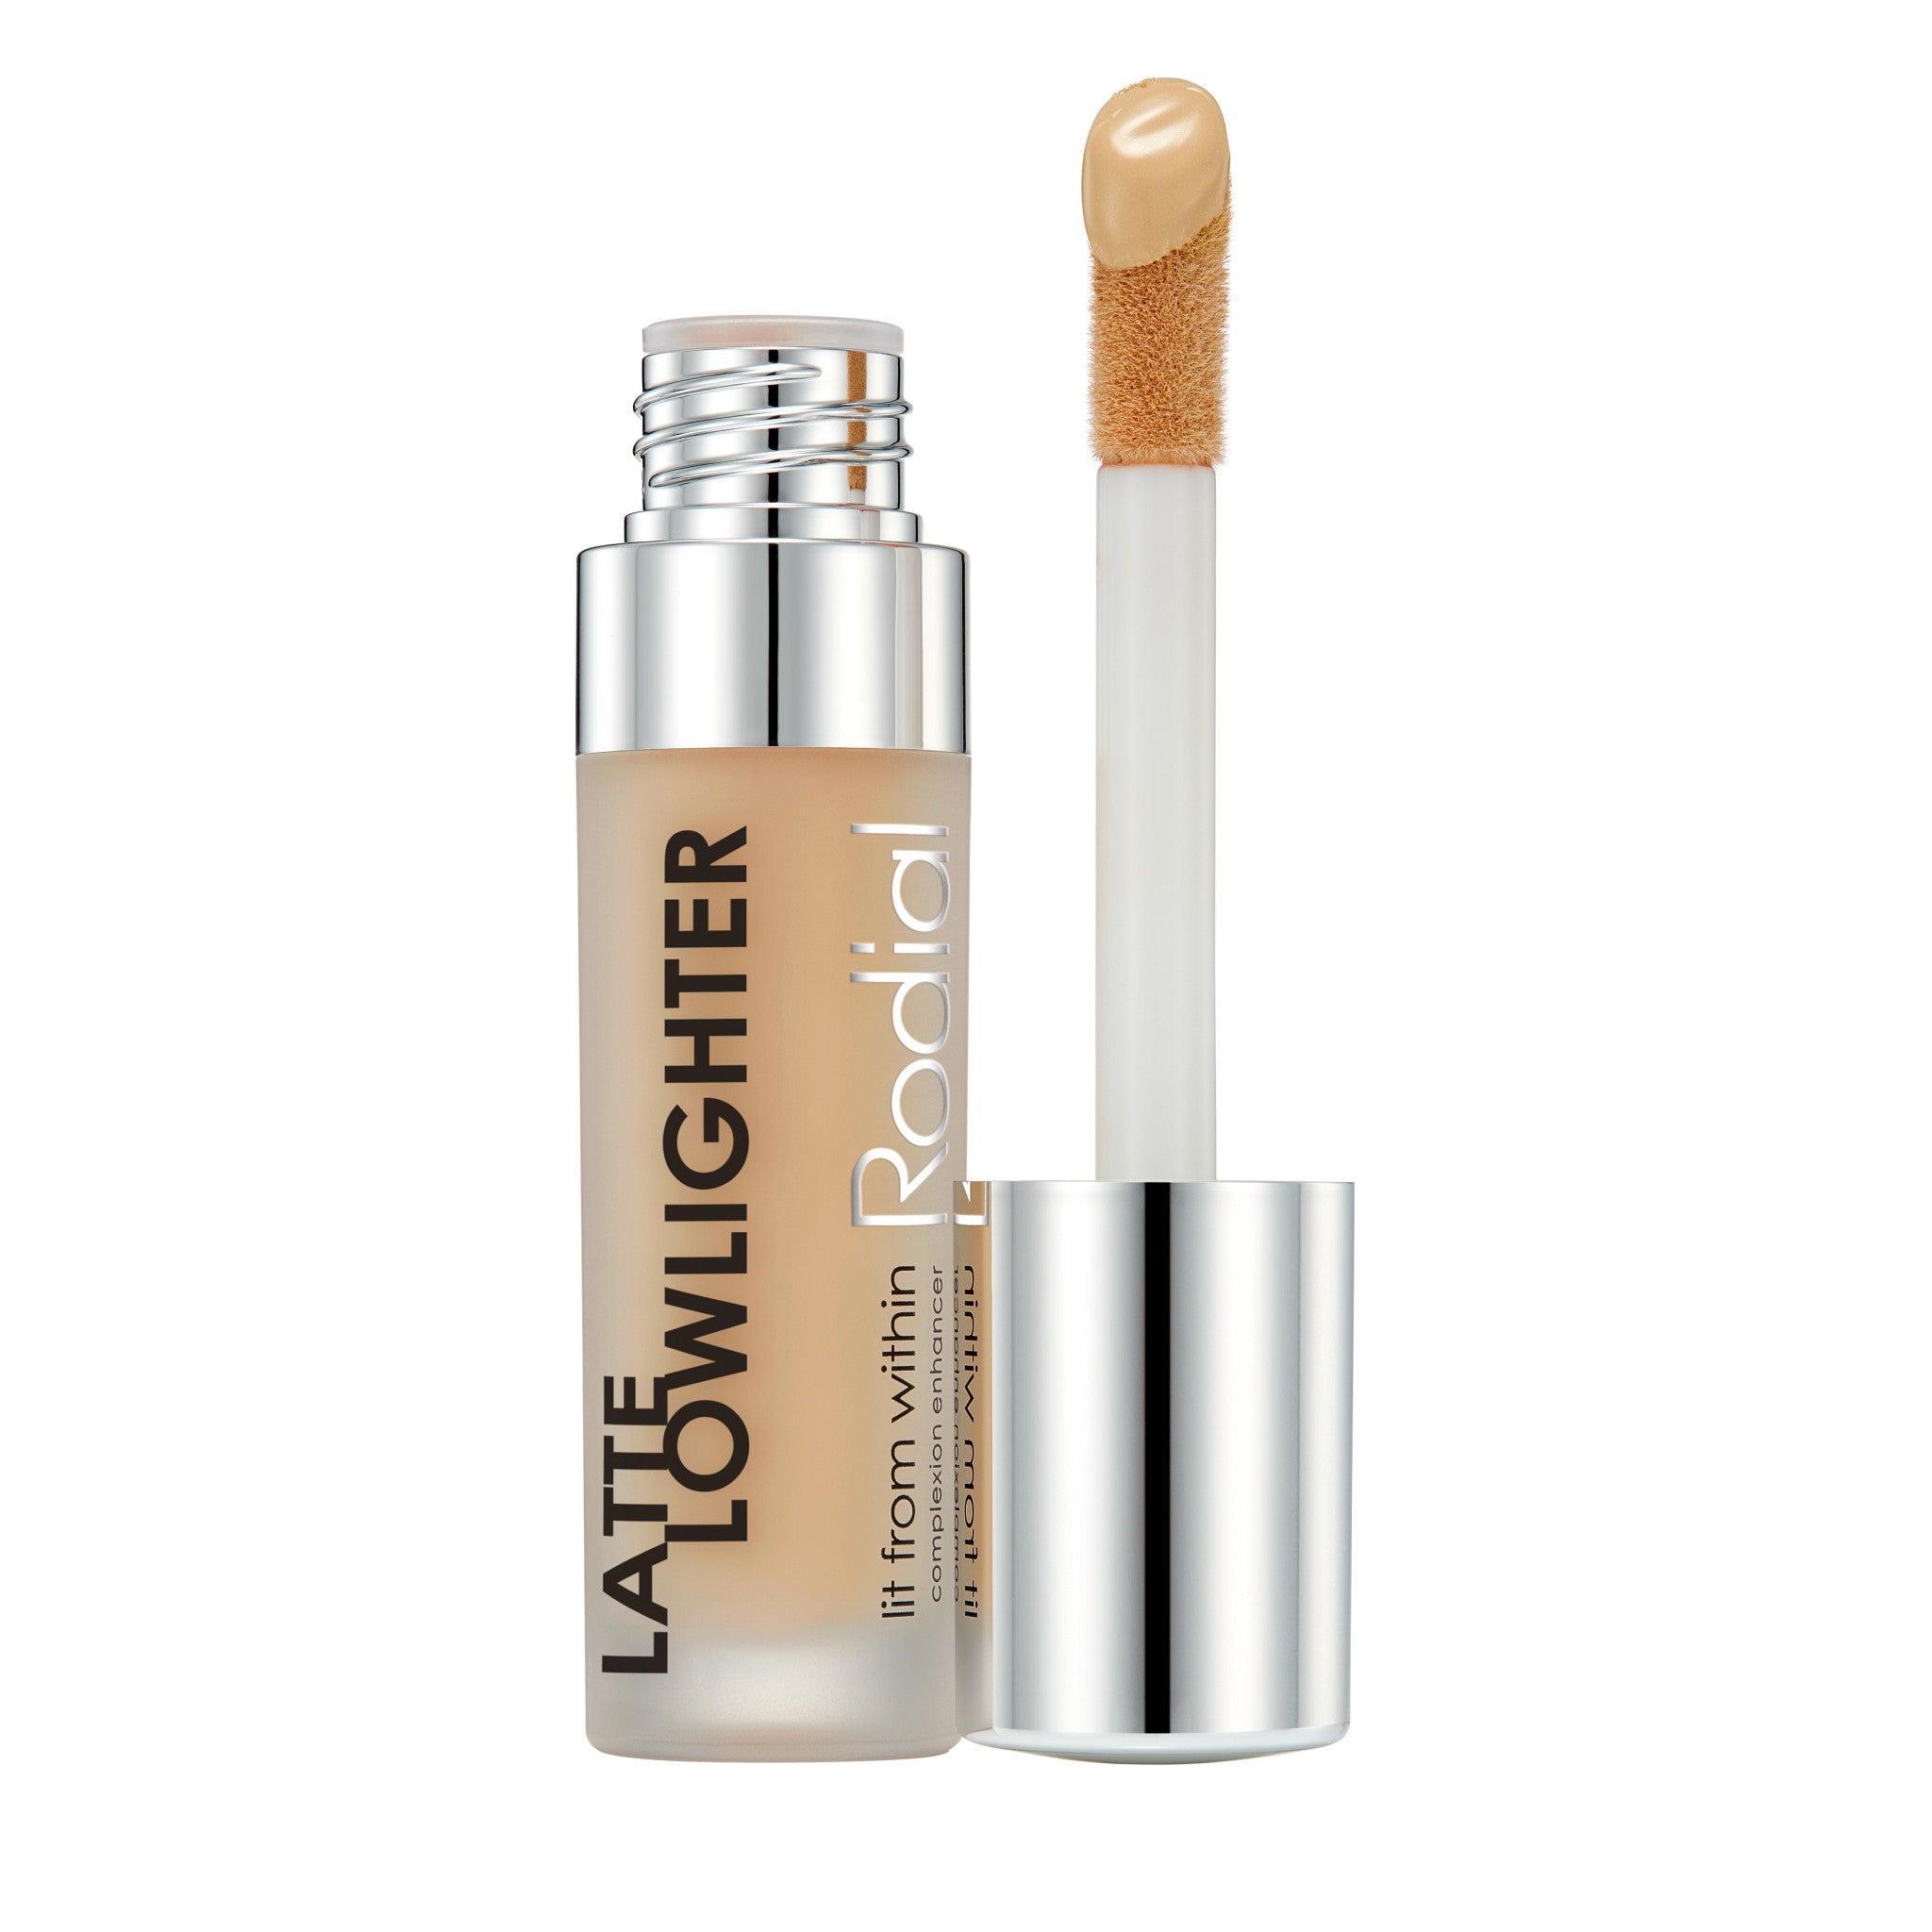 Rodial Latte Lowlighter main image. This product is for medium neutral golden complexions